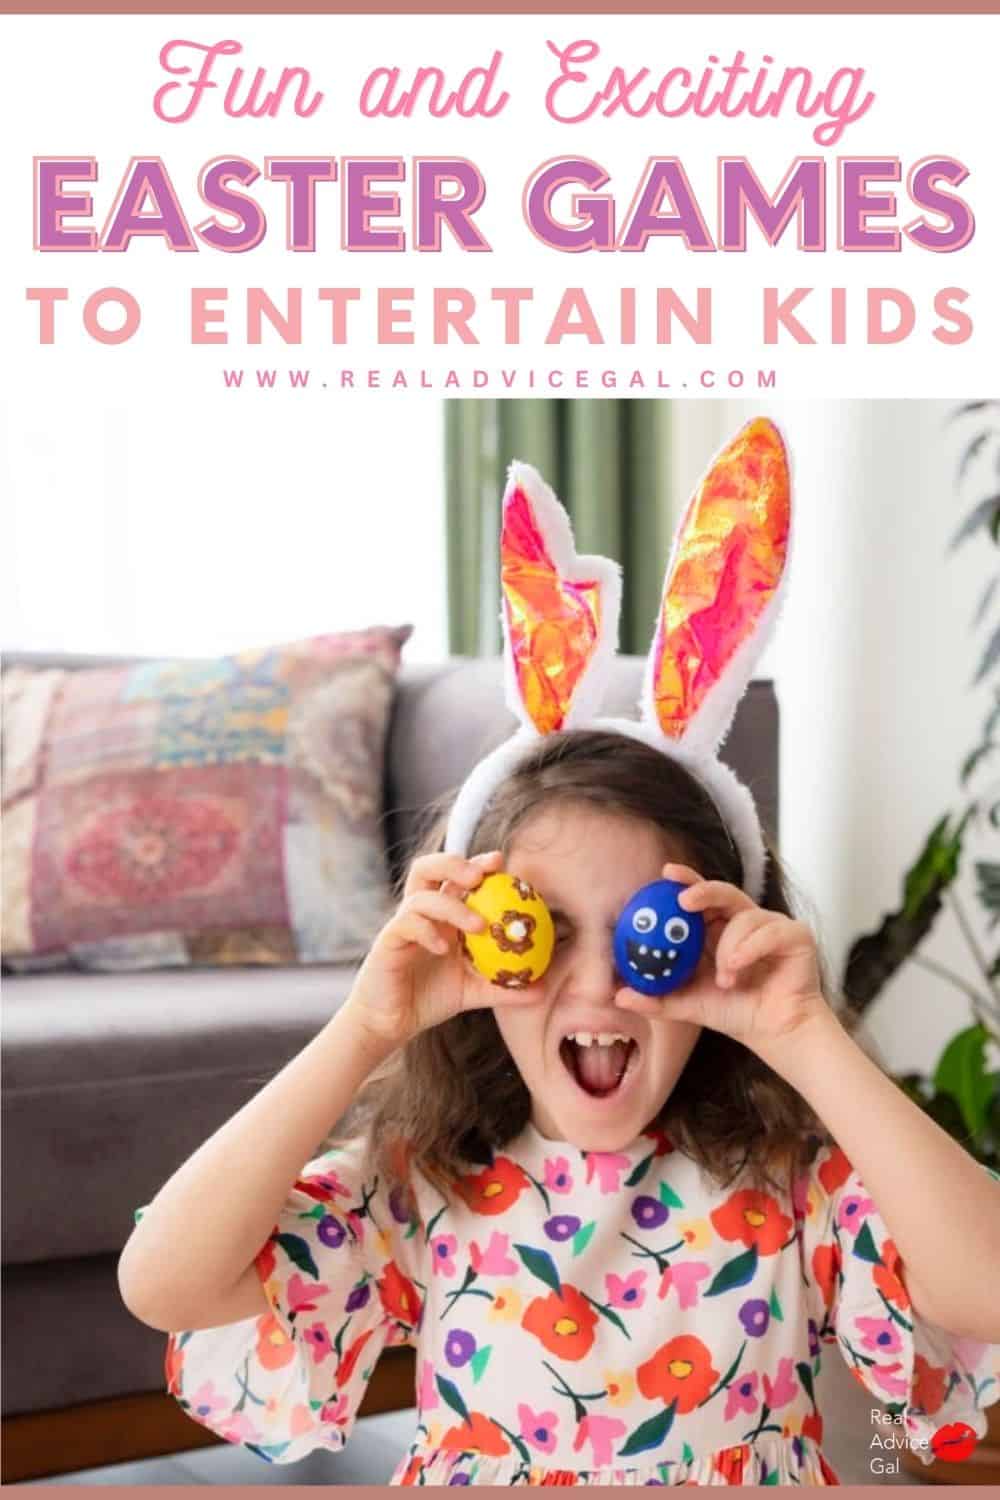 Fun Easter games for kids